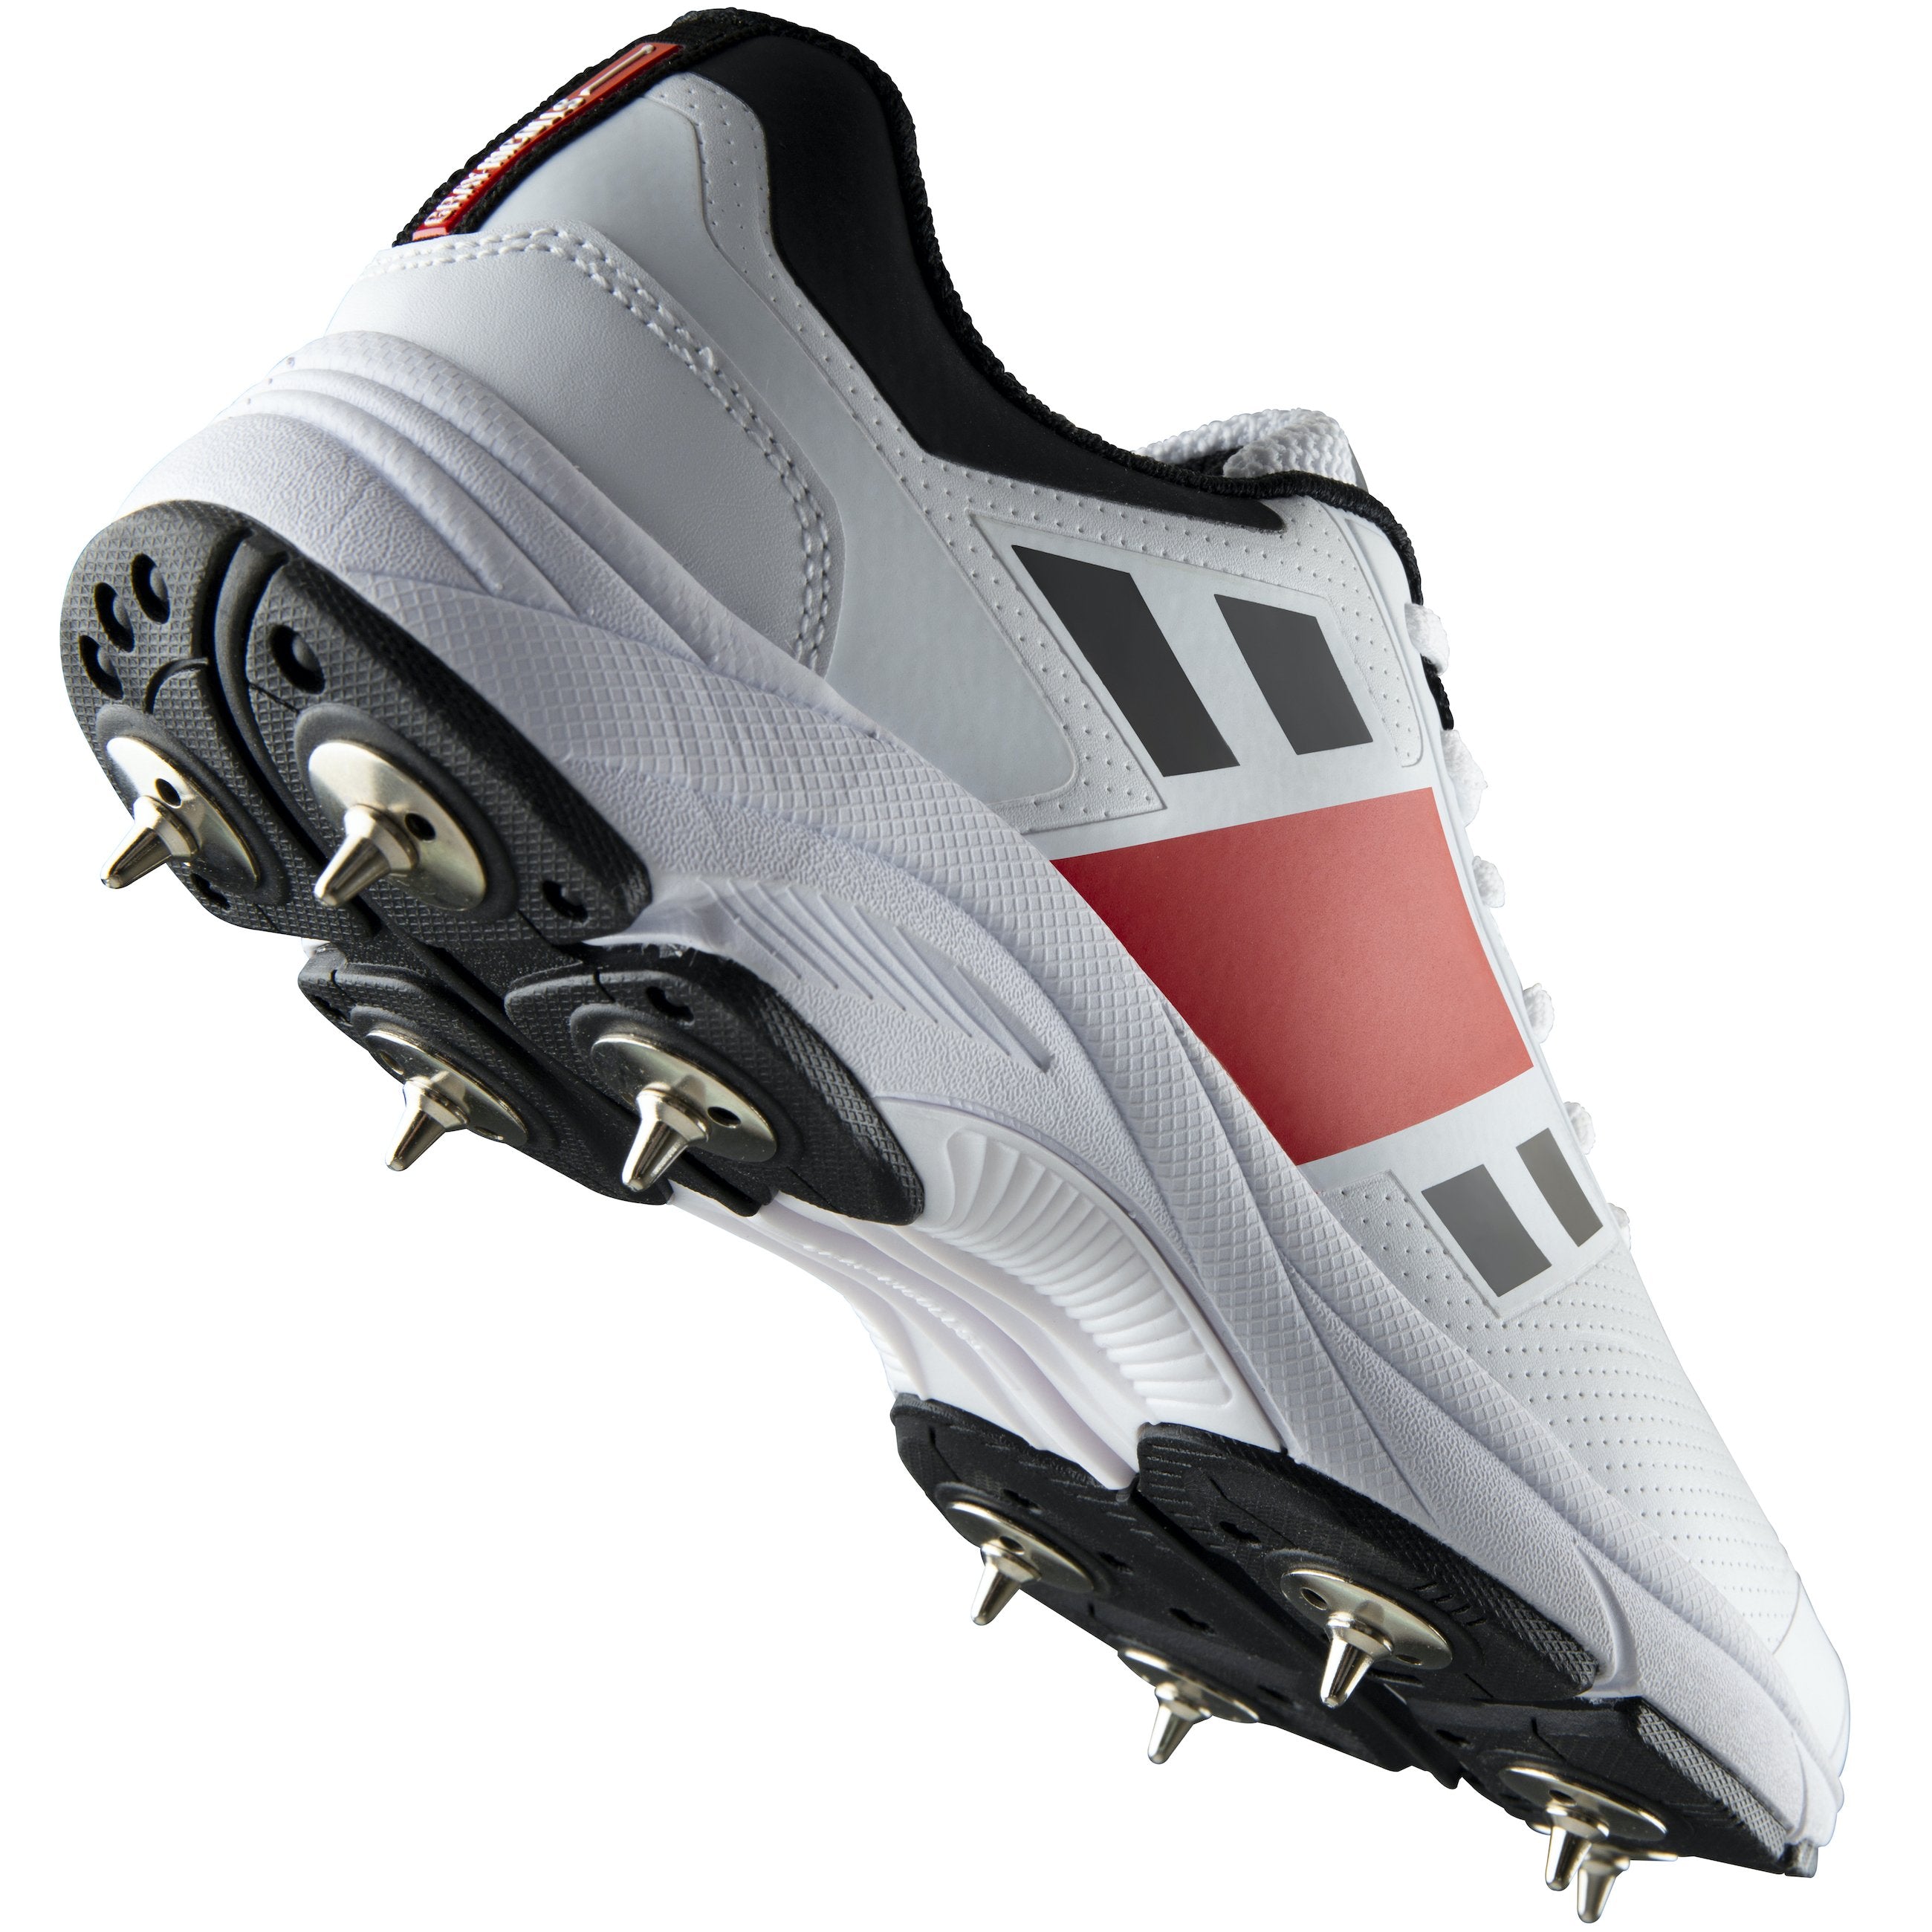 Velocity 3.0 Spike Junior Shoes